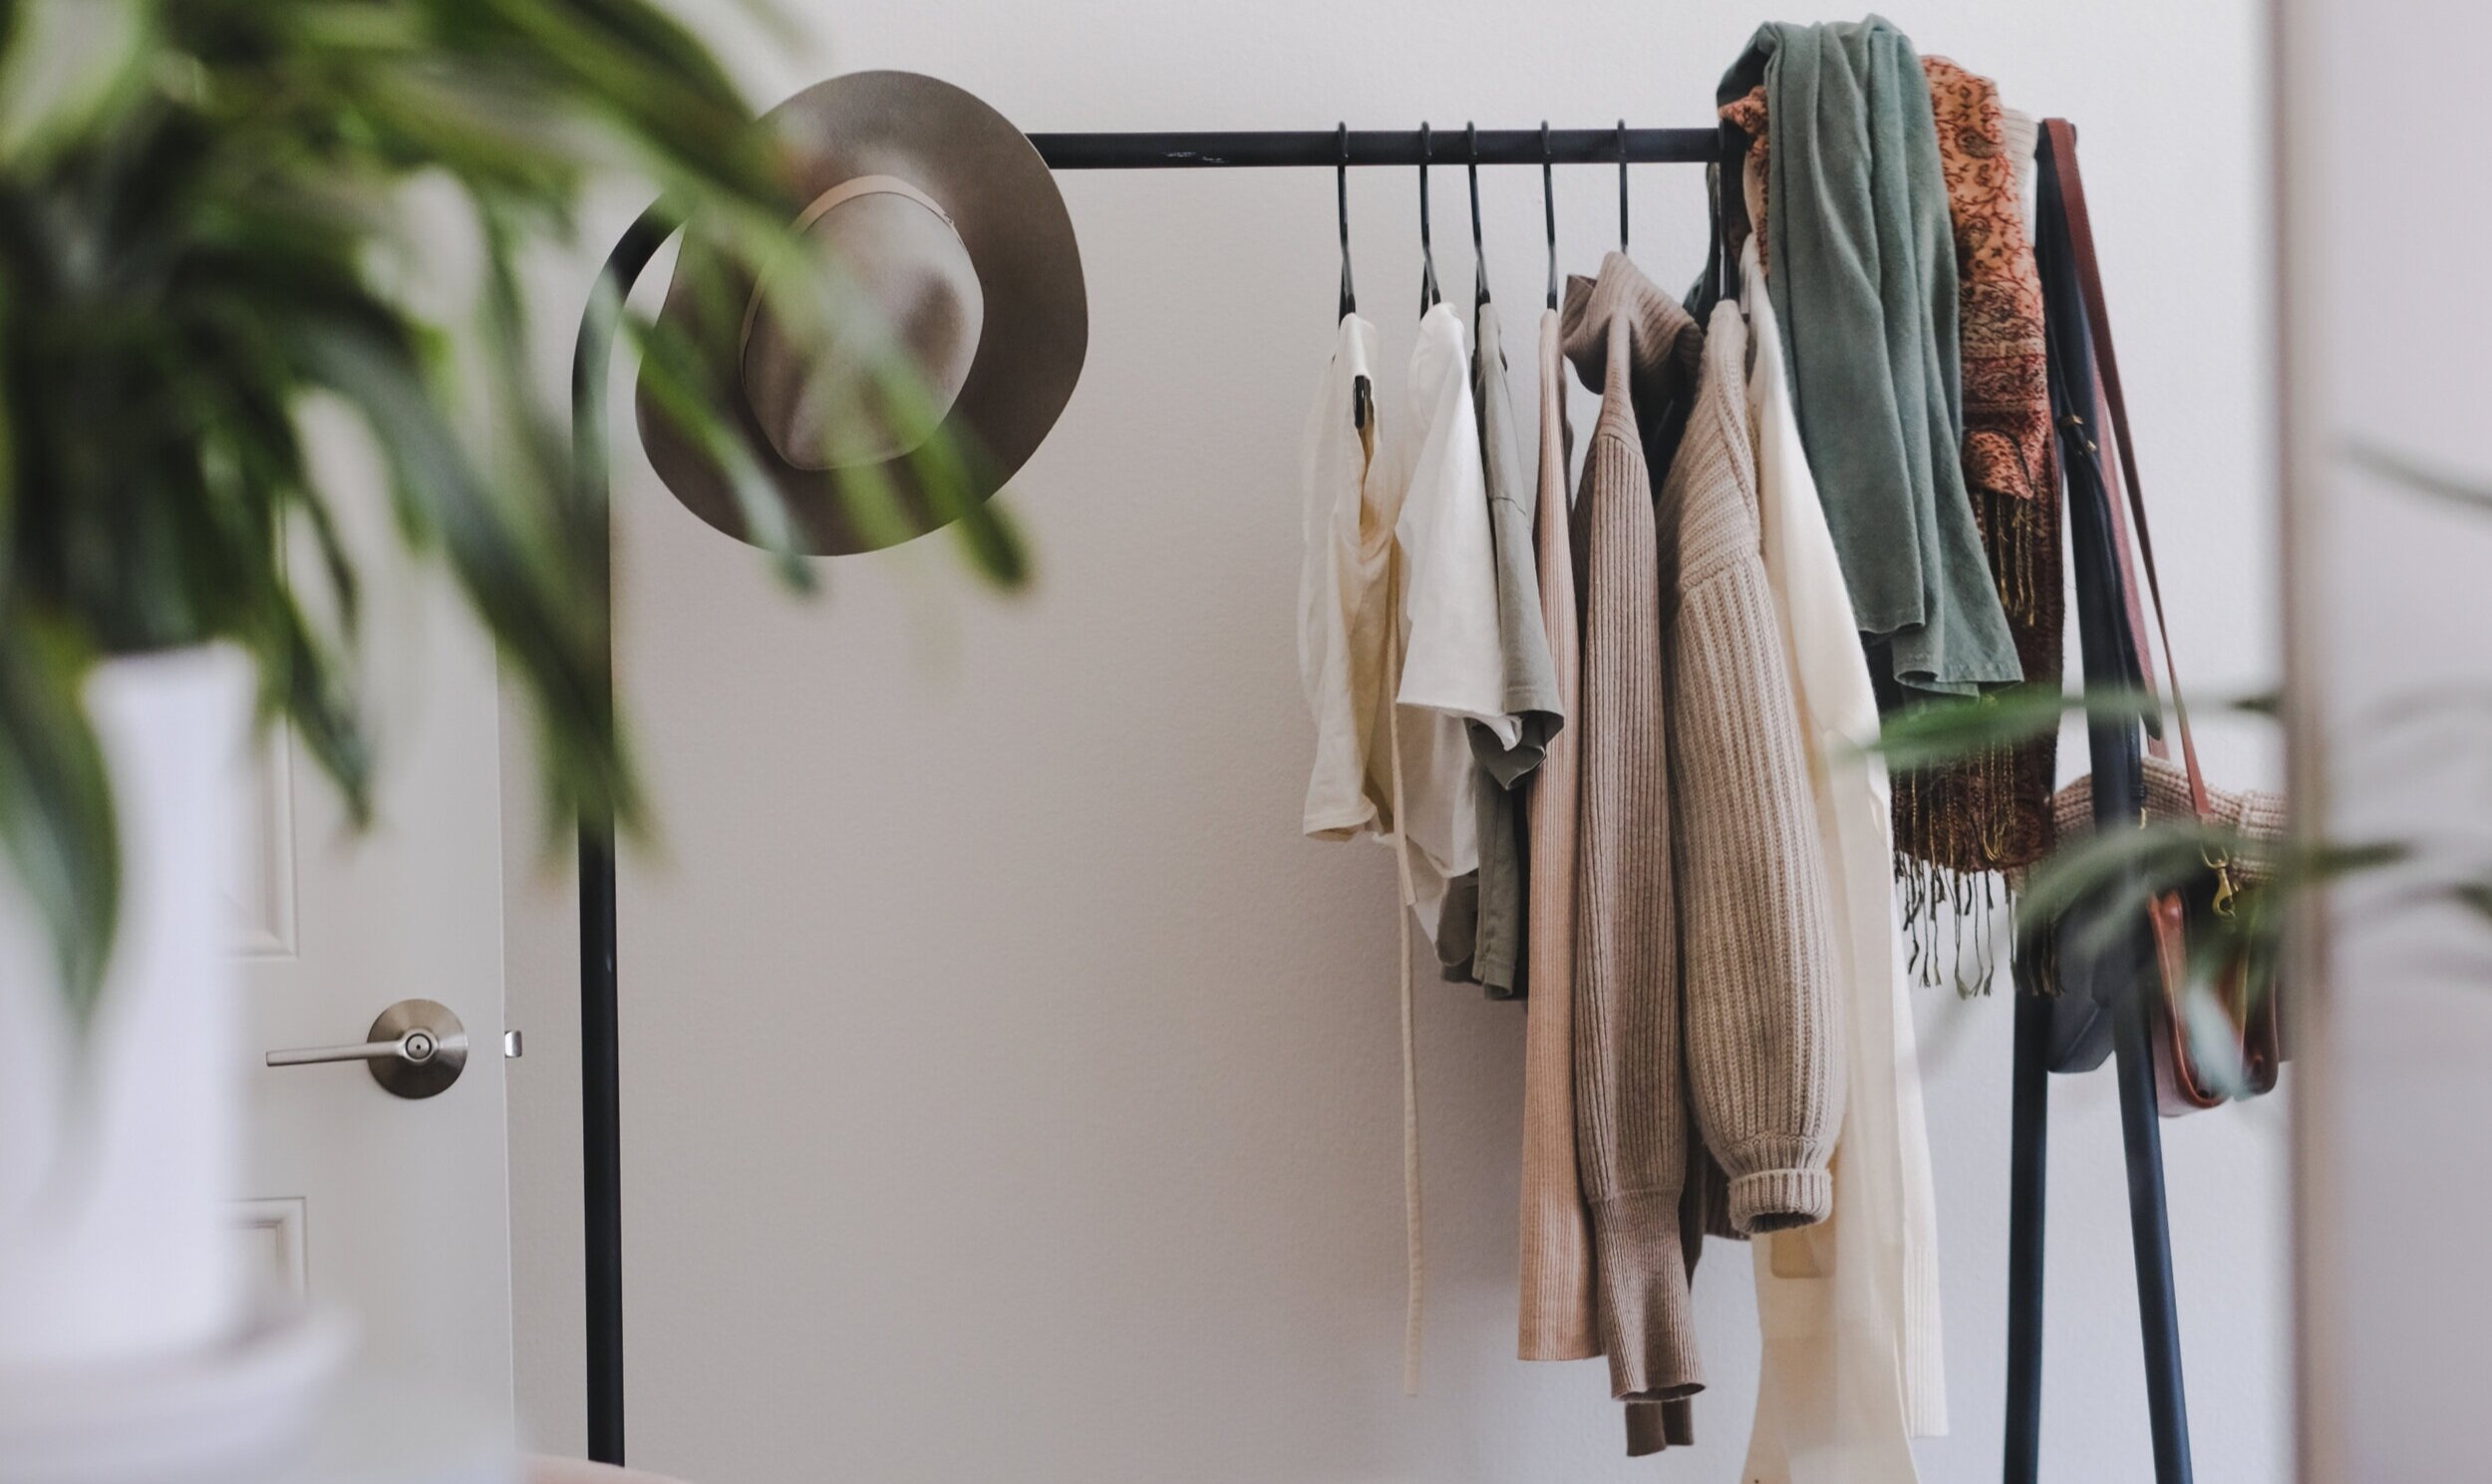 12 plant-dyed, organic clothing brands to support and wear for 